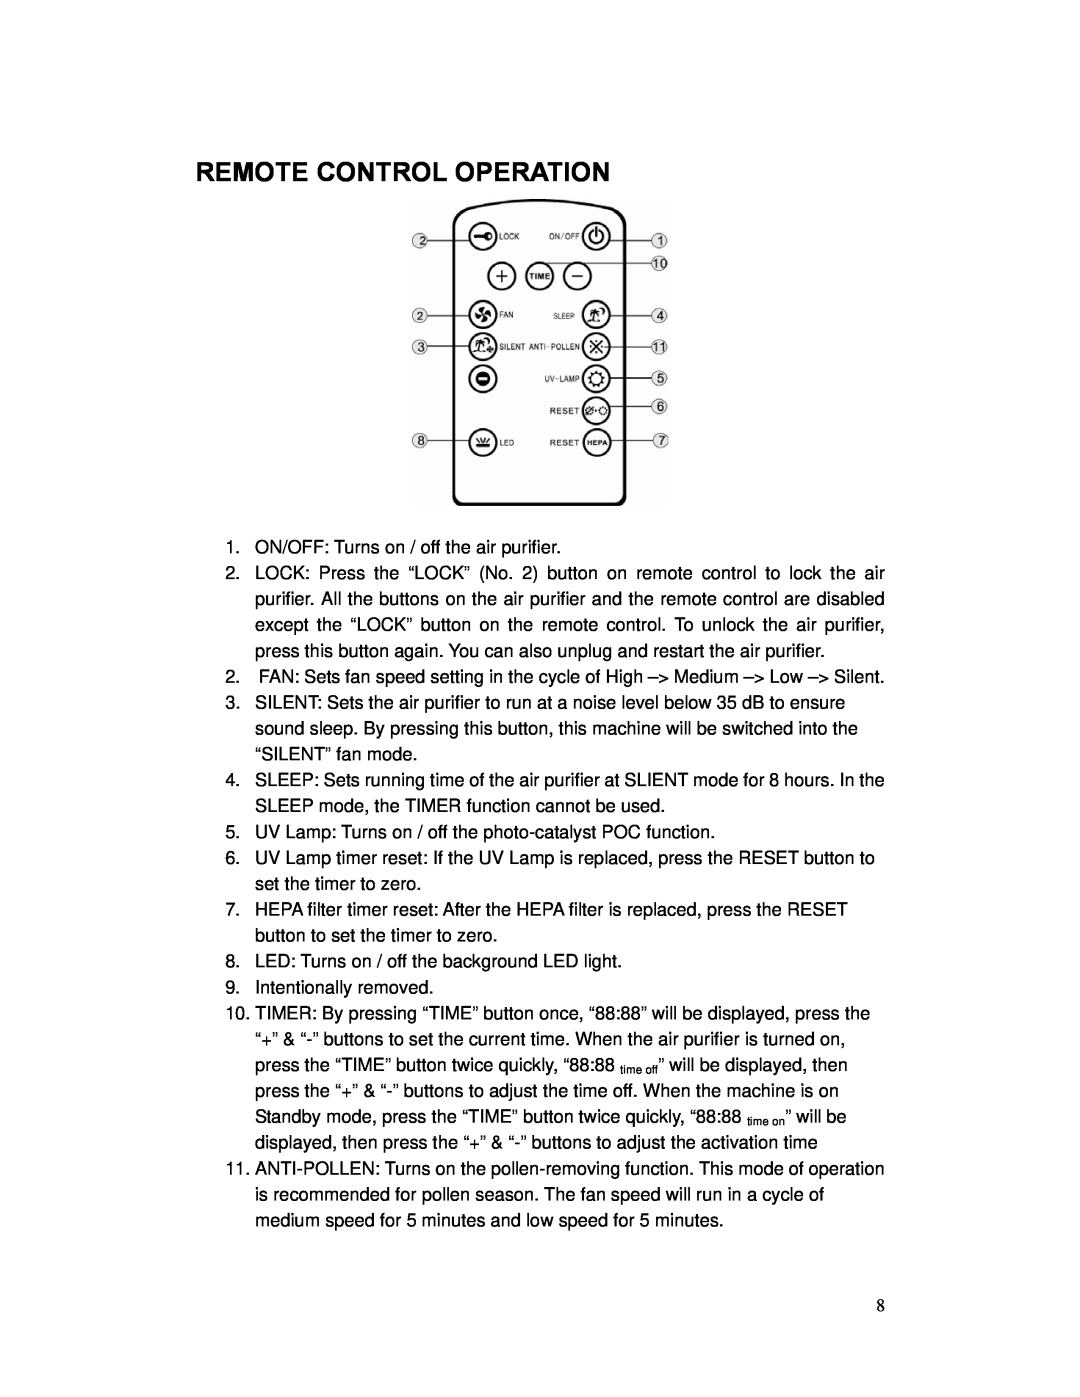 Whynter AFR-300 instruction manual Remote Control Operation 